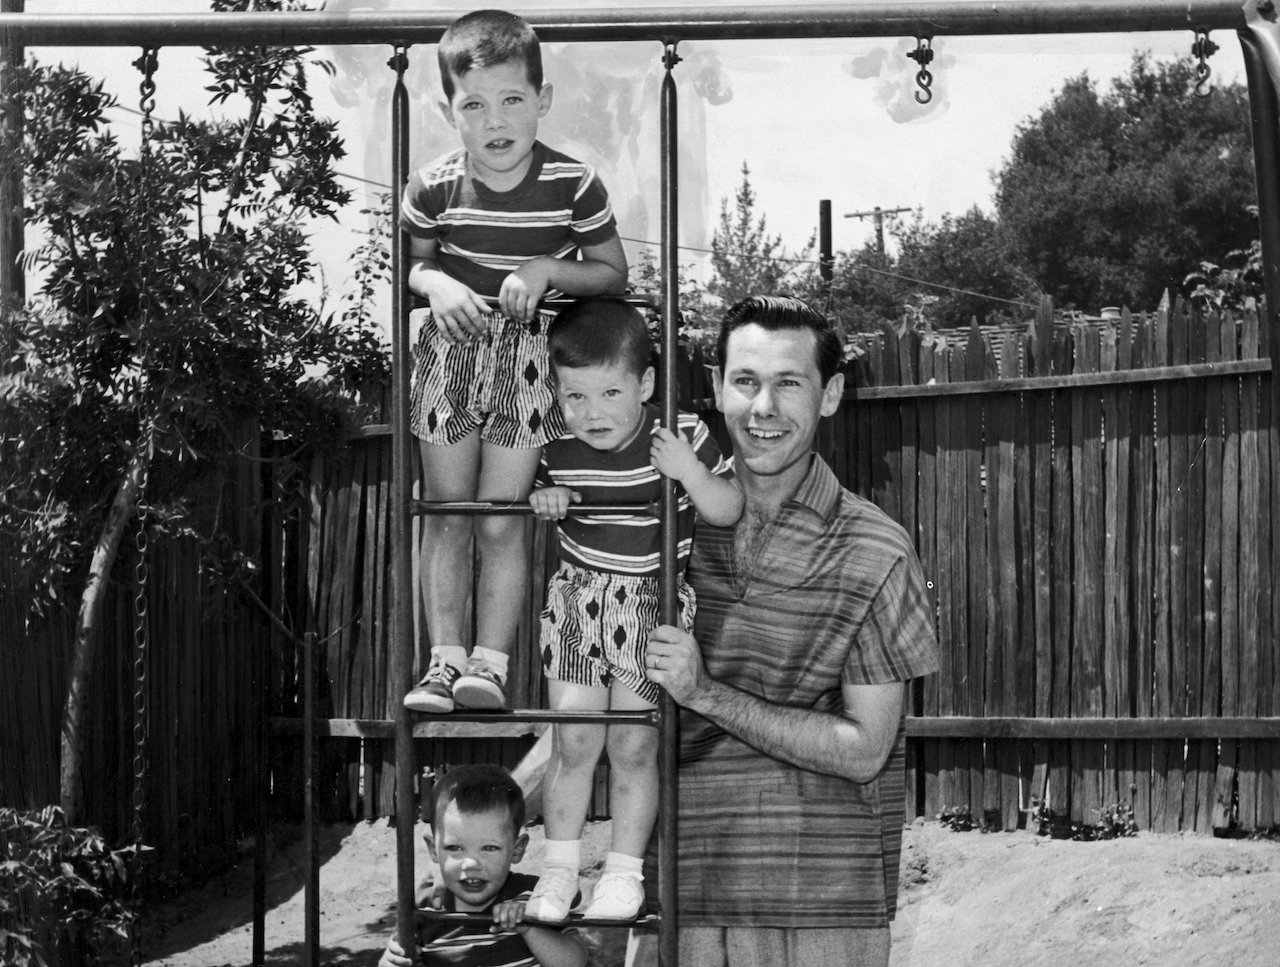 Johnny Carson poses with (top to bottom) Christopher, Richard and Cory Carson on a ladder in their back yard at home c. 1955